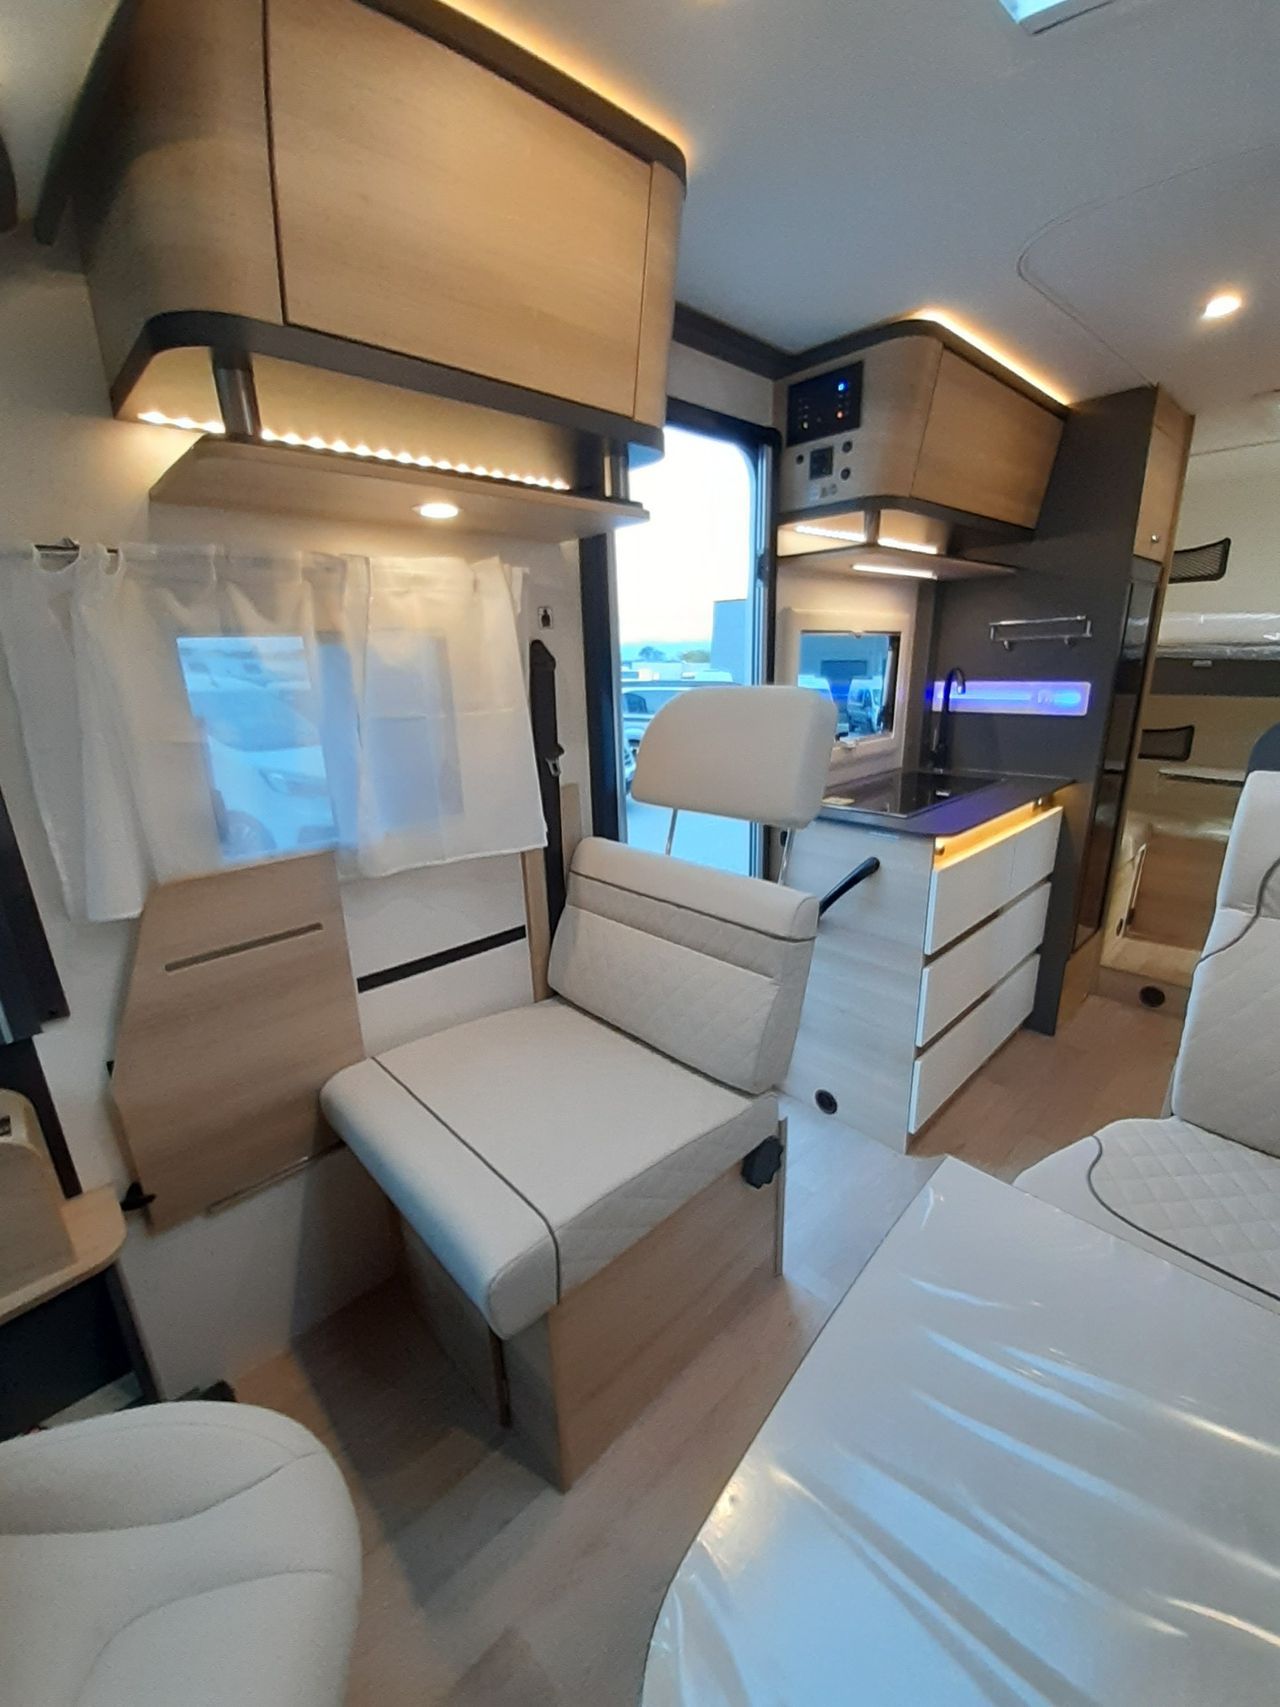 Camping-car - Itineo - CS600 / 2 000 € D'ACCESSOIRES OFFERTS - 2024